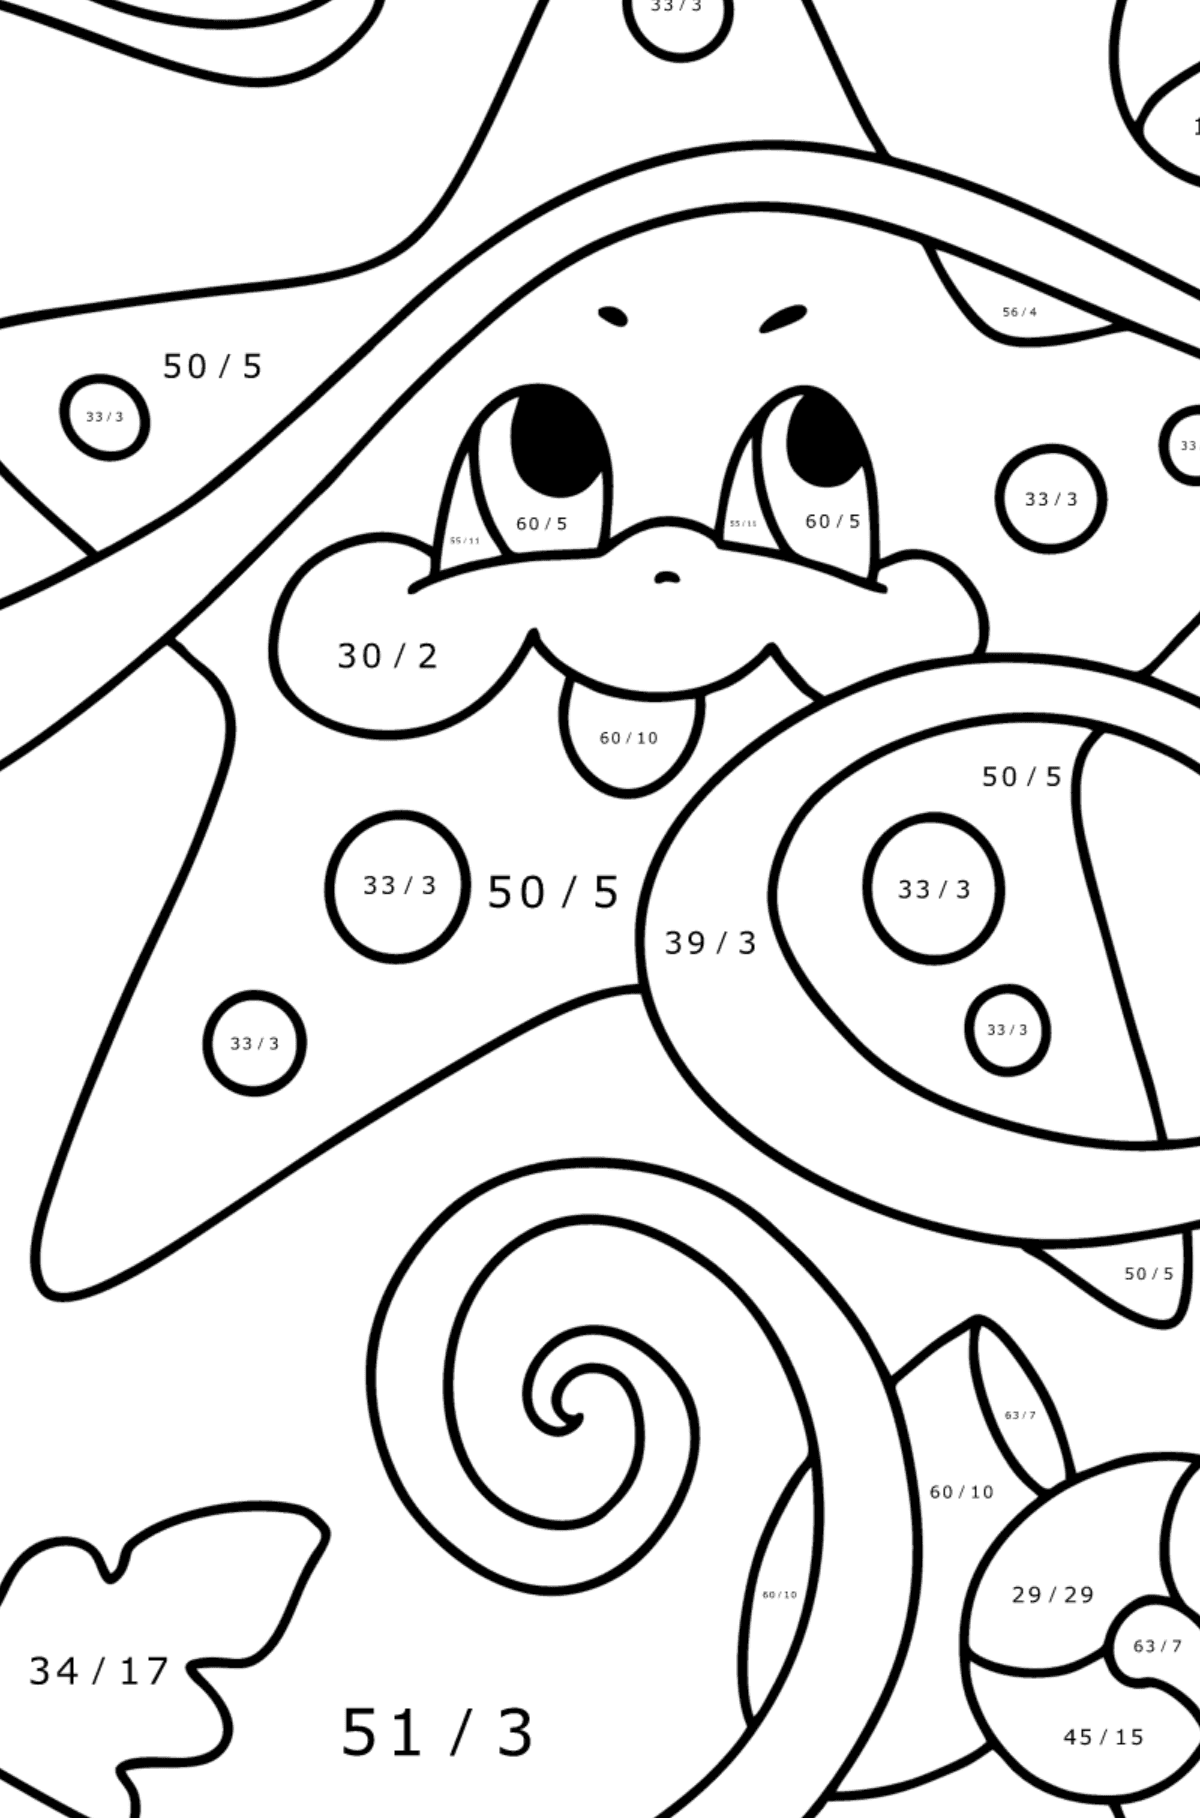 Baby starfish coloring page - Math Coloring - Division for Kids